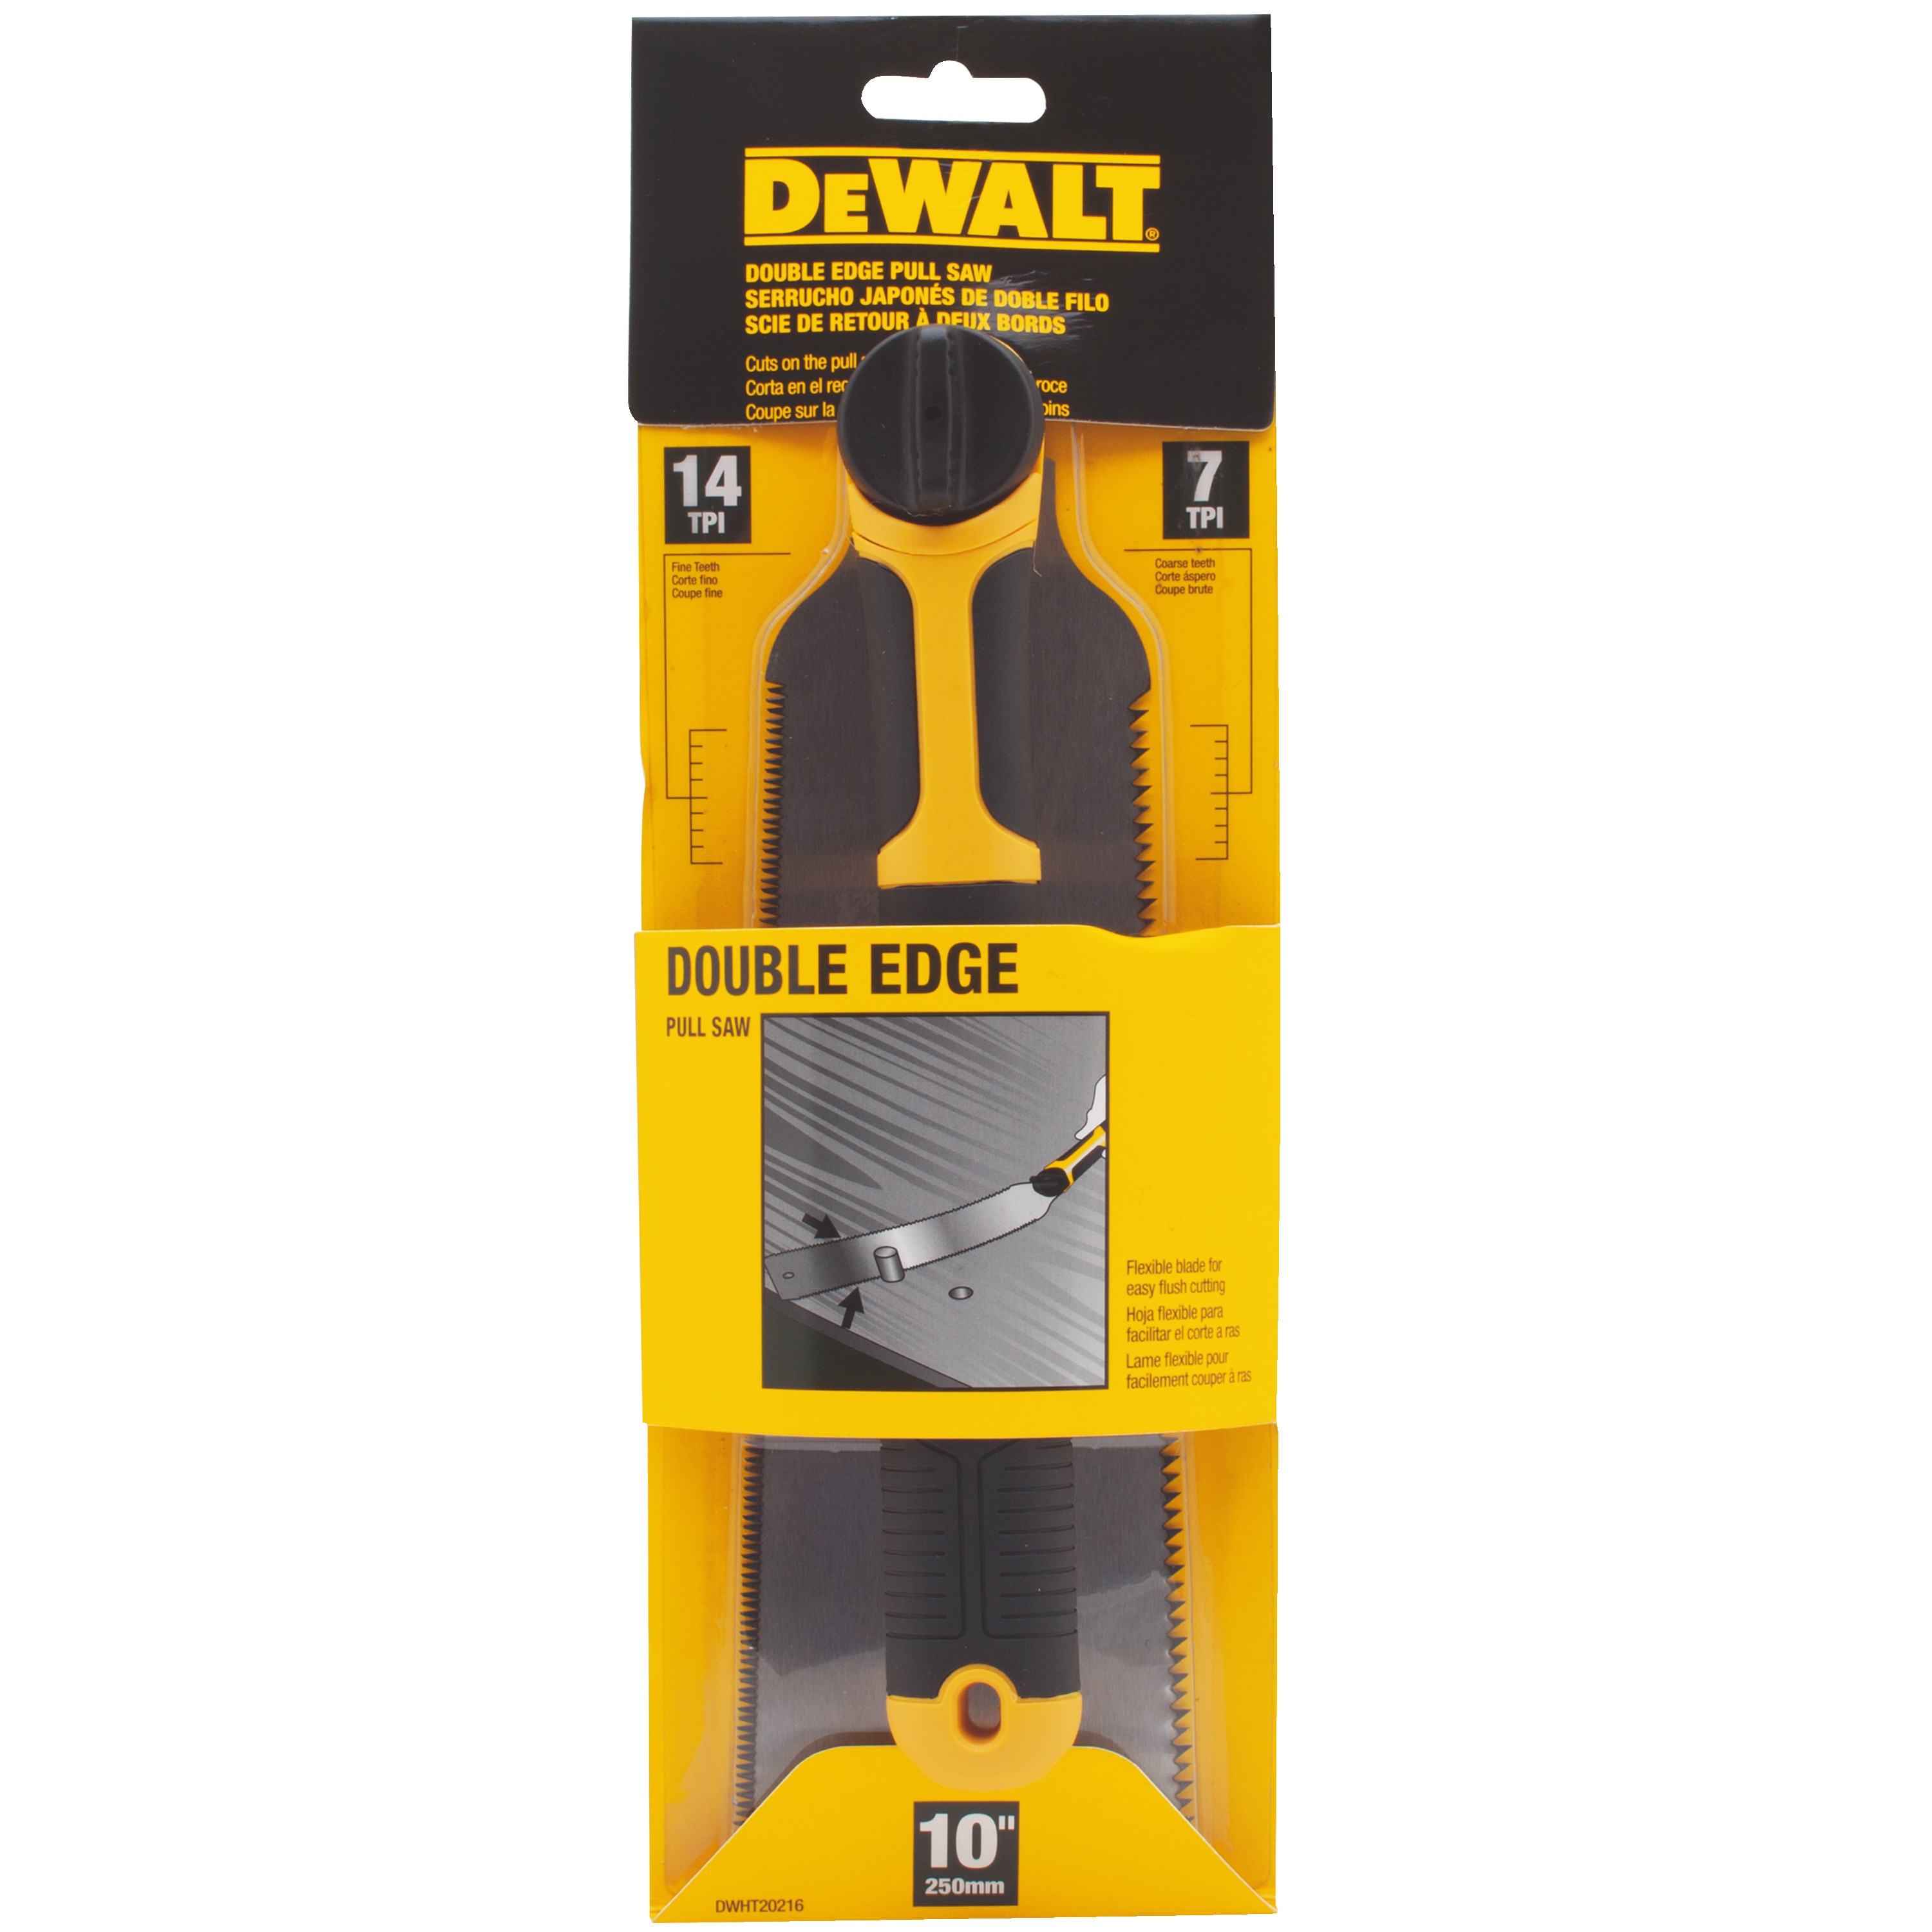 Double Edge Pull Saw in carded blister packaging. 